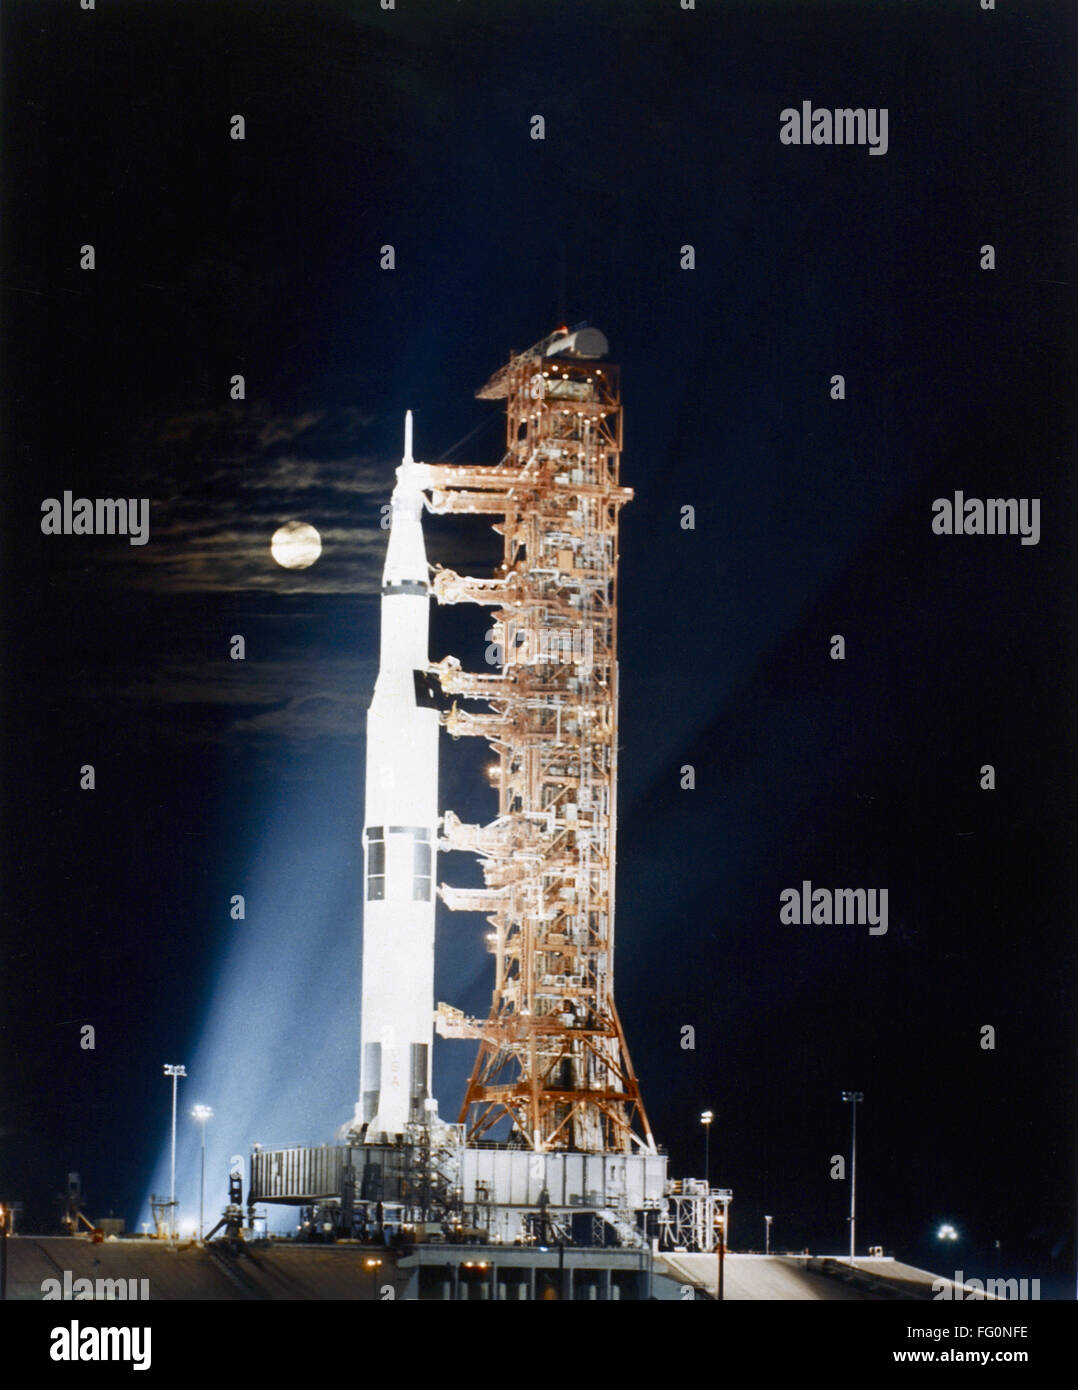 Neil Armstrong MOON MISSION Saturn V Transporter Apollo 11 Launch Pad PHOTO 